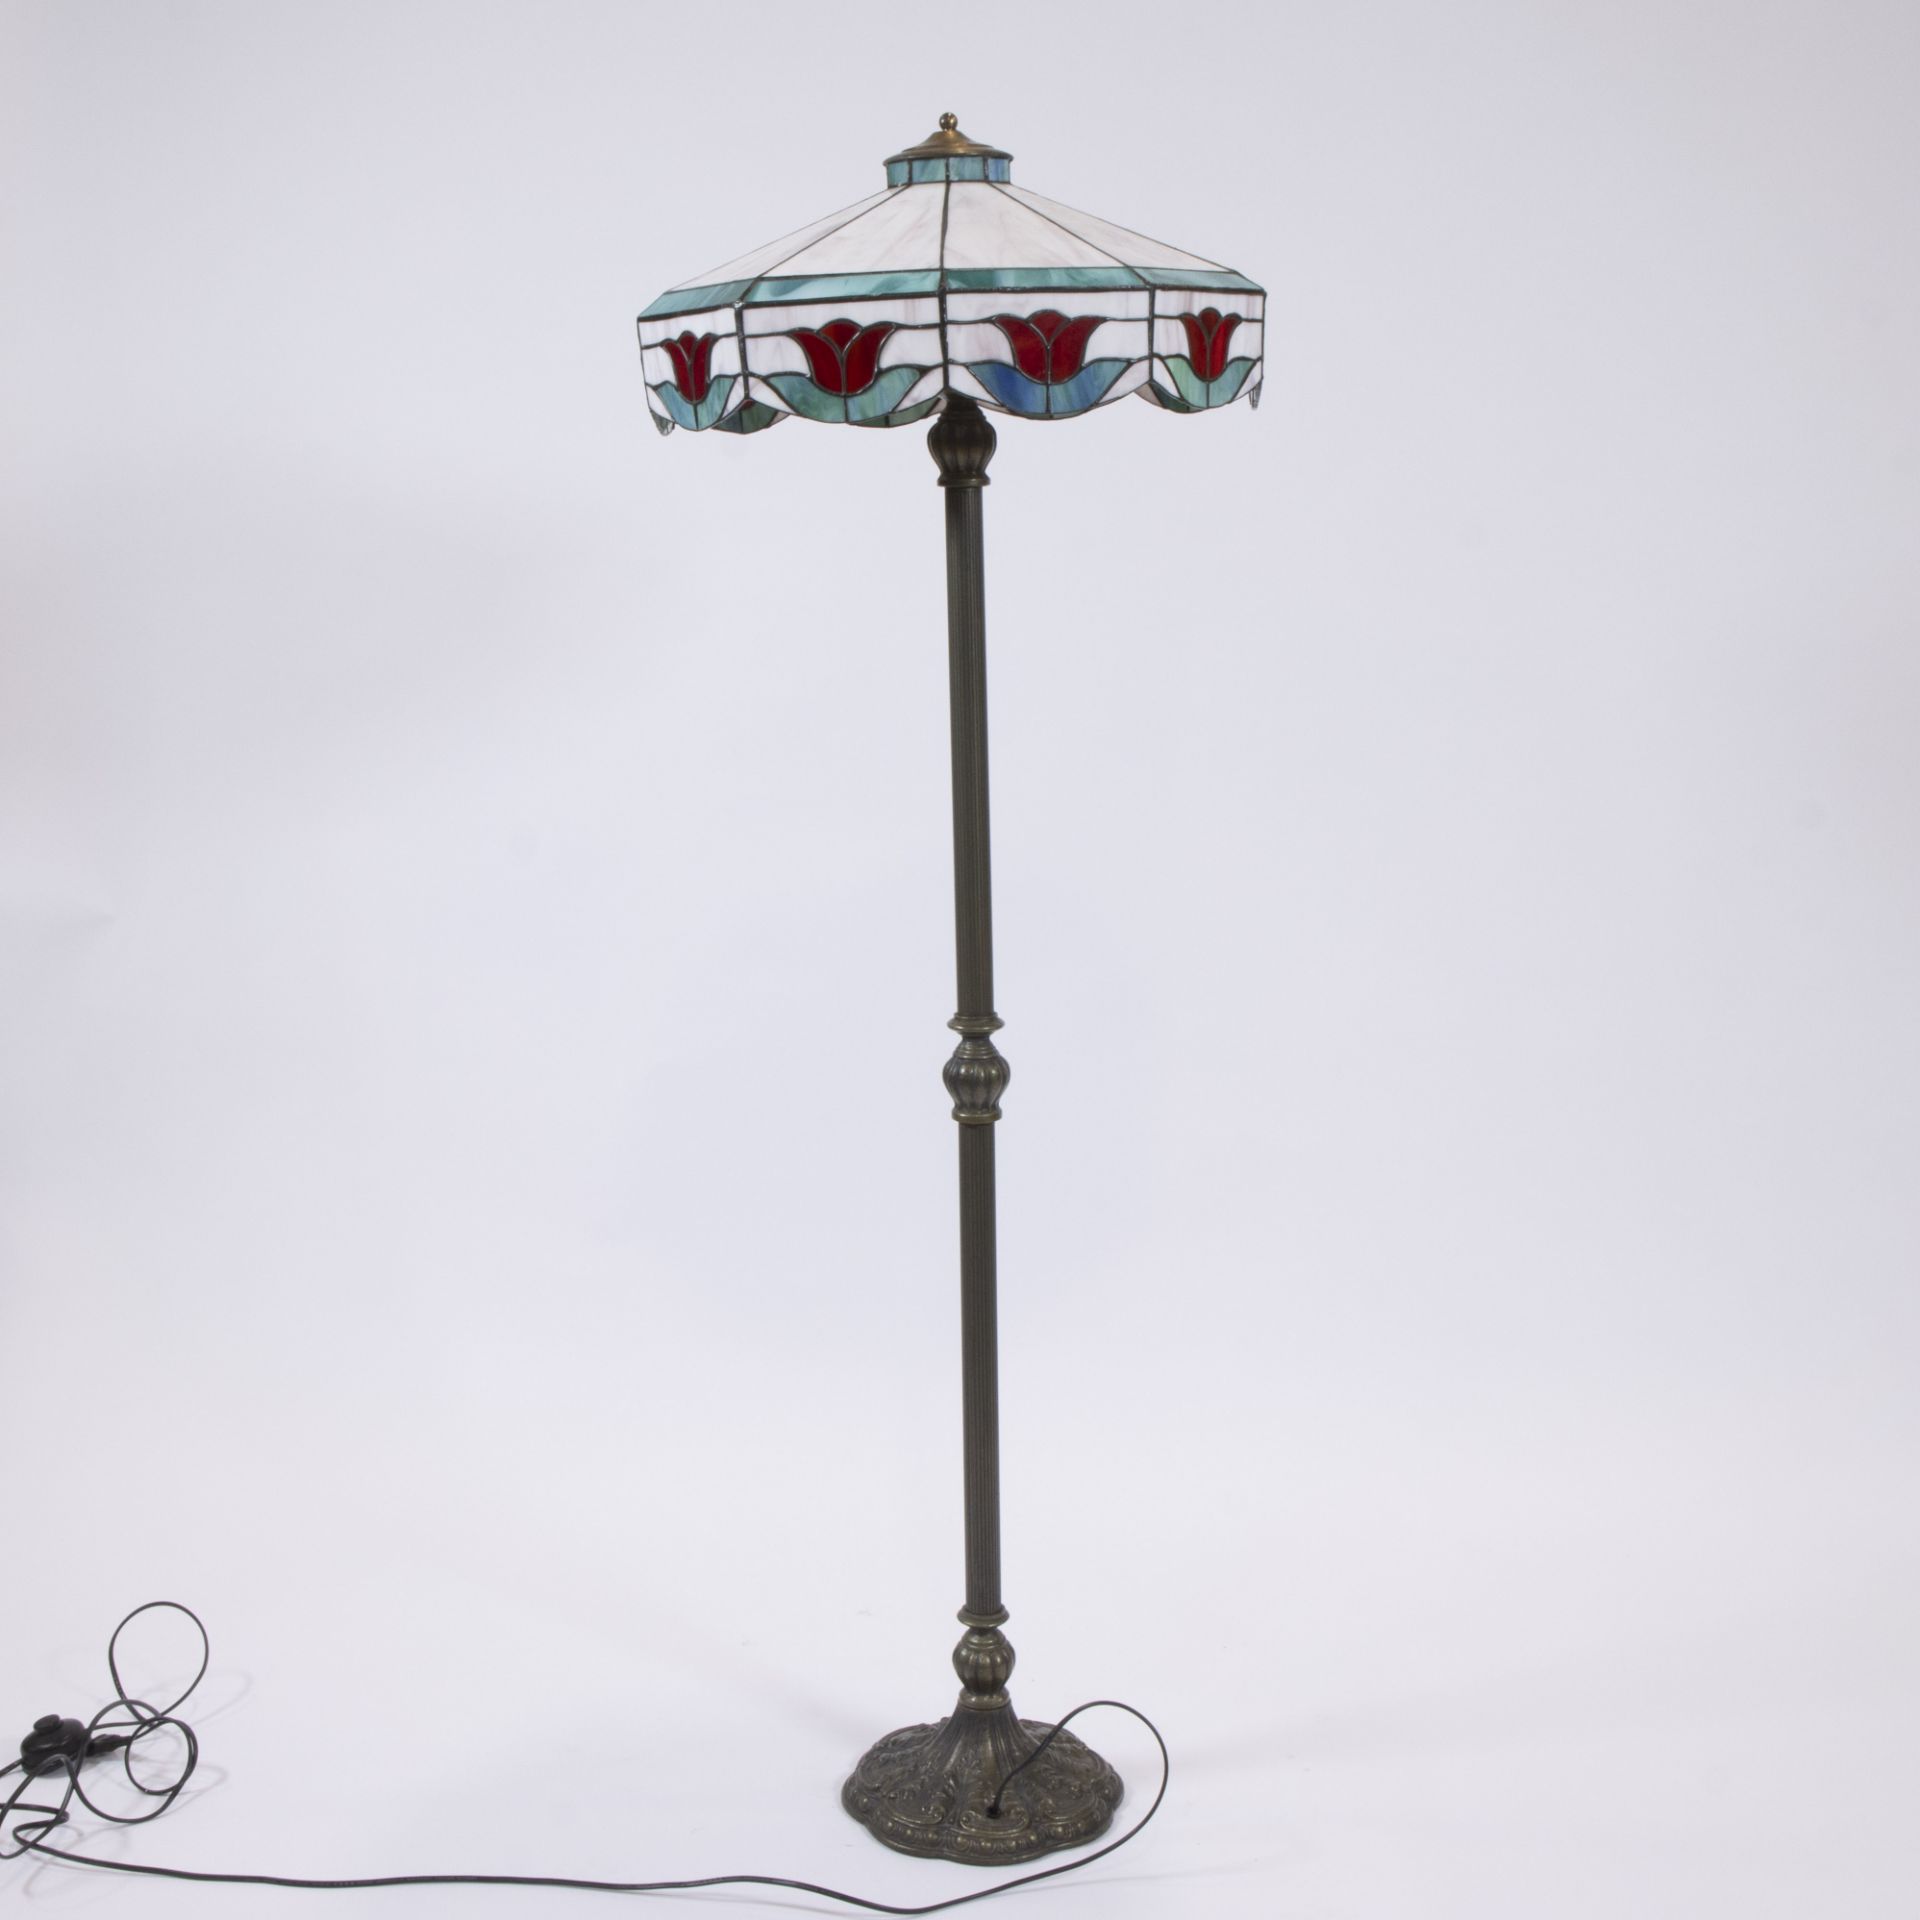 Floor lamp in Tiffany style with stained glass - Image 3 of 4